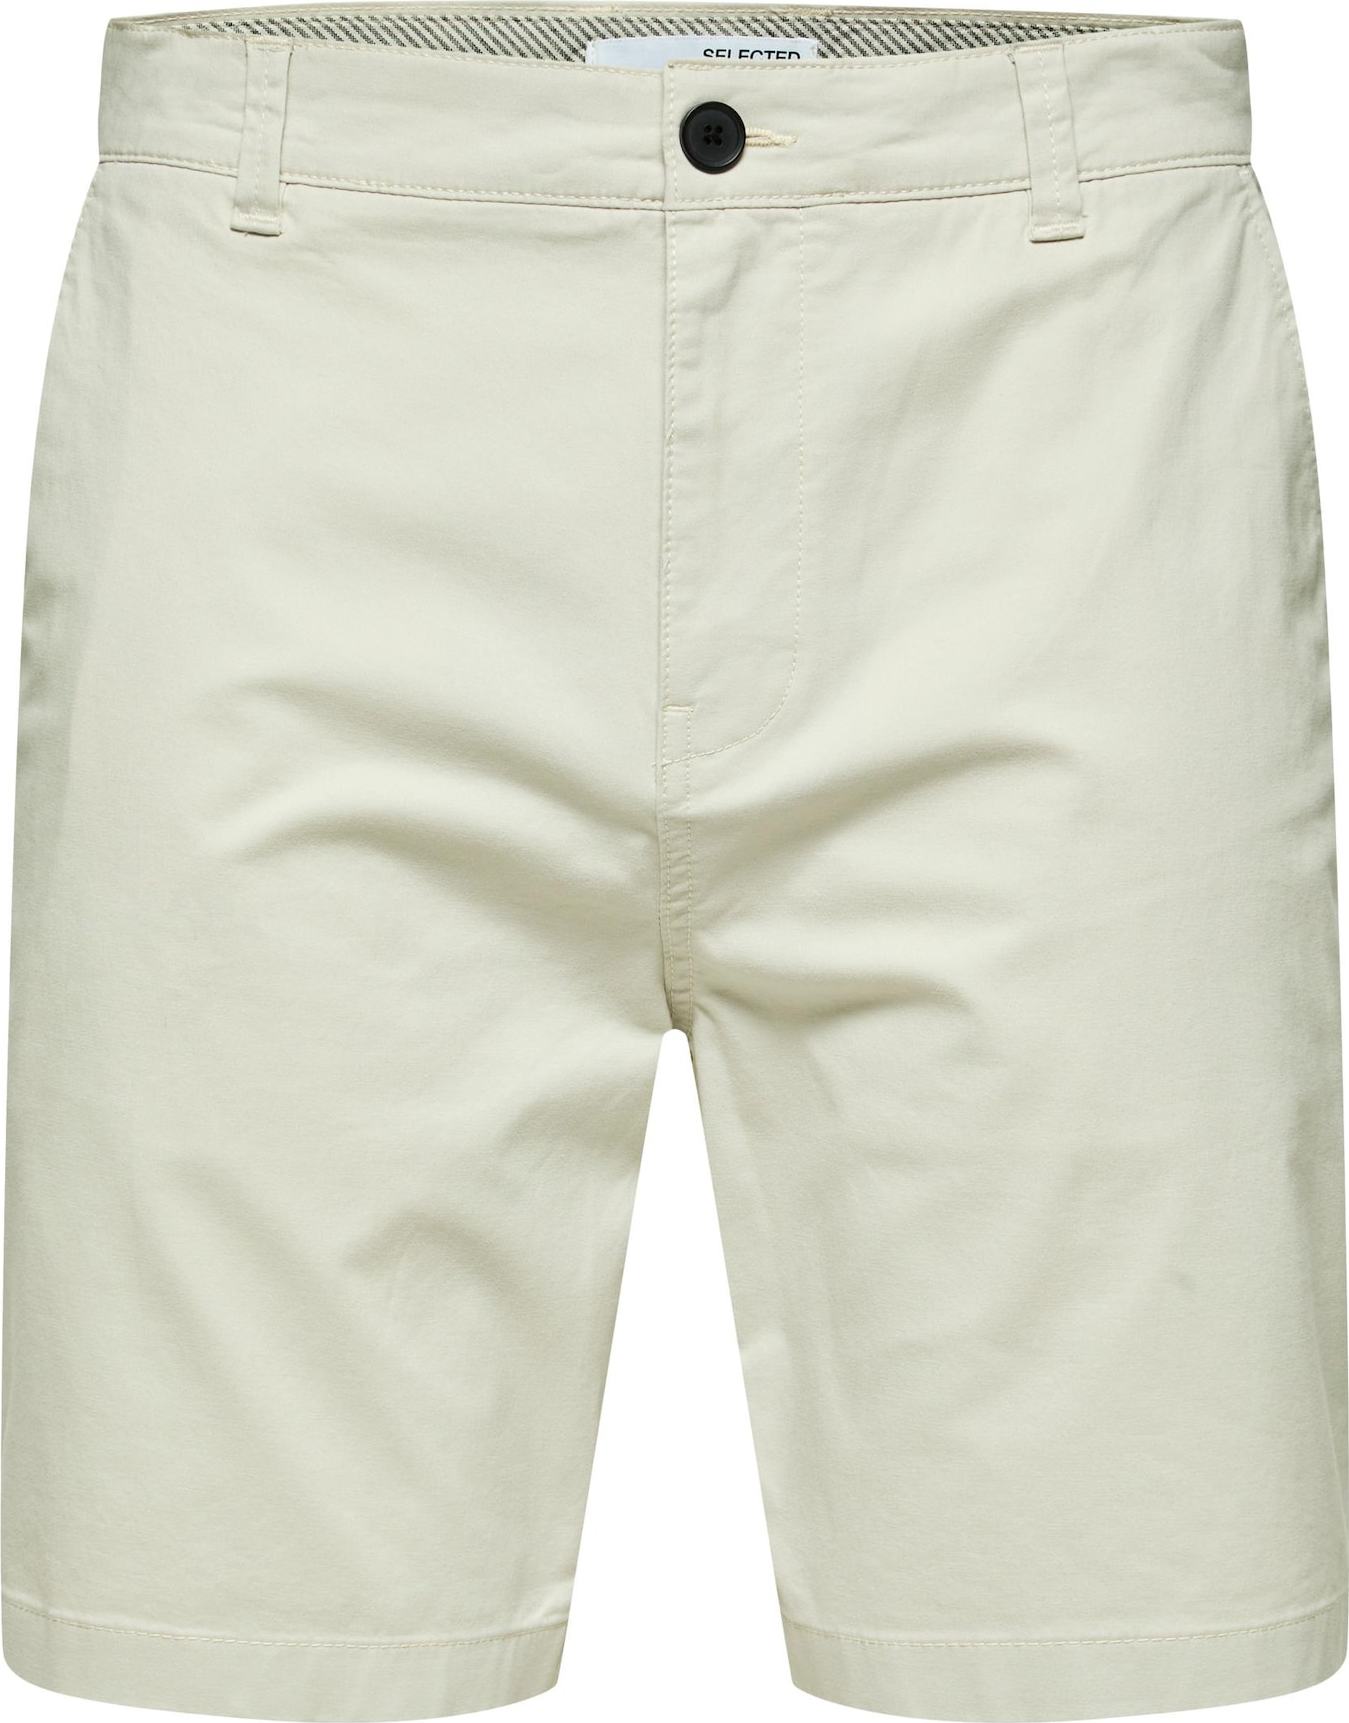 SELECTED HOMME Chino kalhoty offwhite